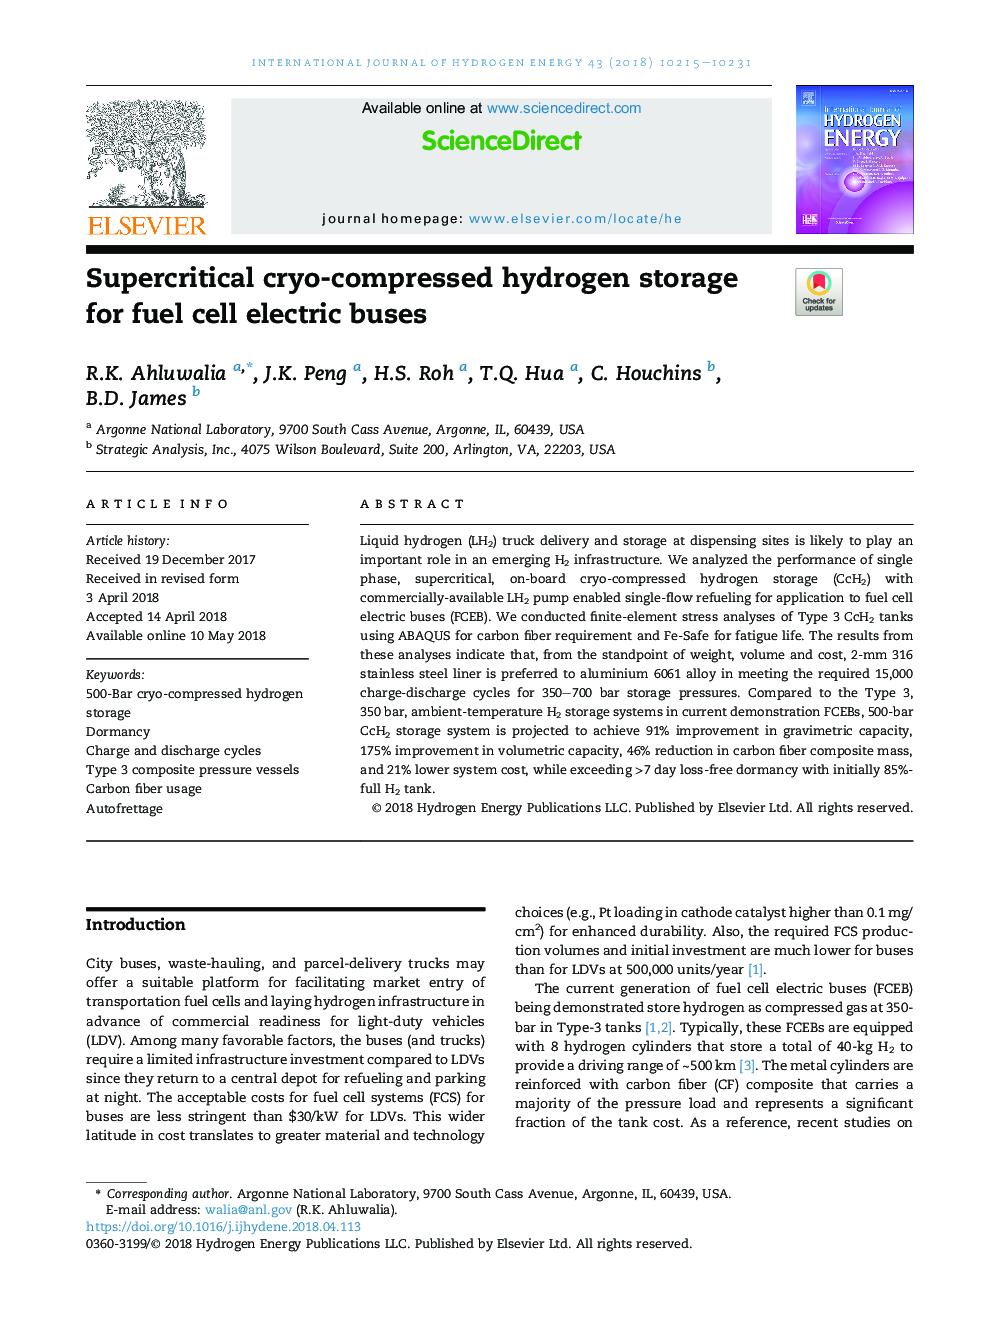 Supercritical cryo-compressed hydrogen storage for fuel cell electric buses